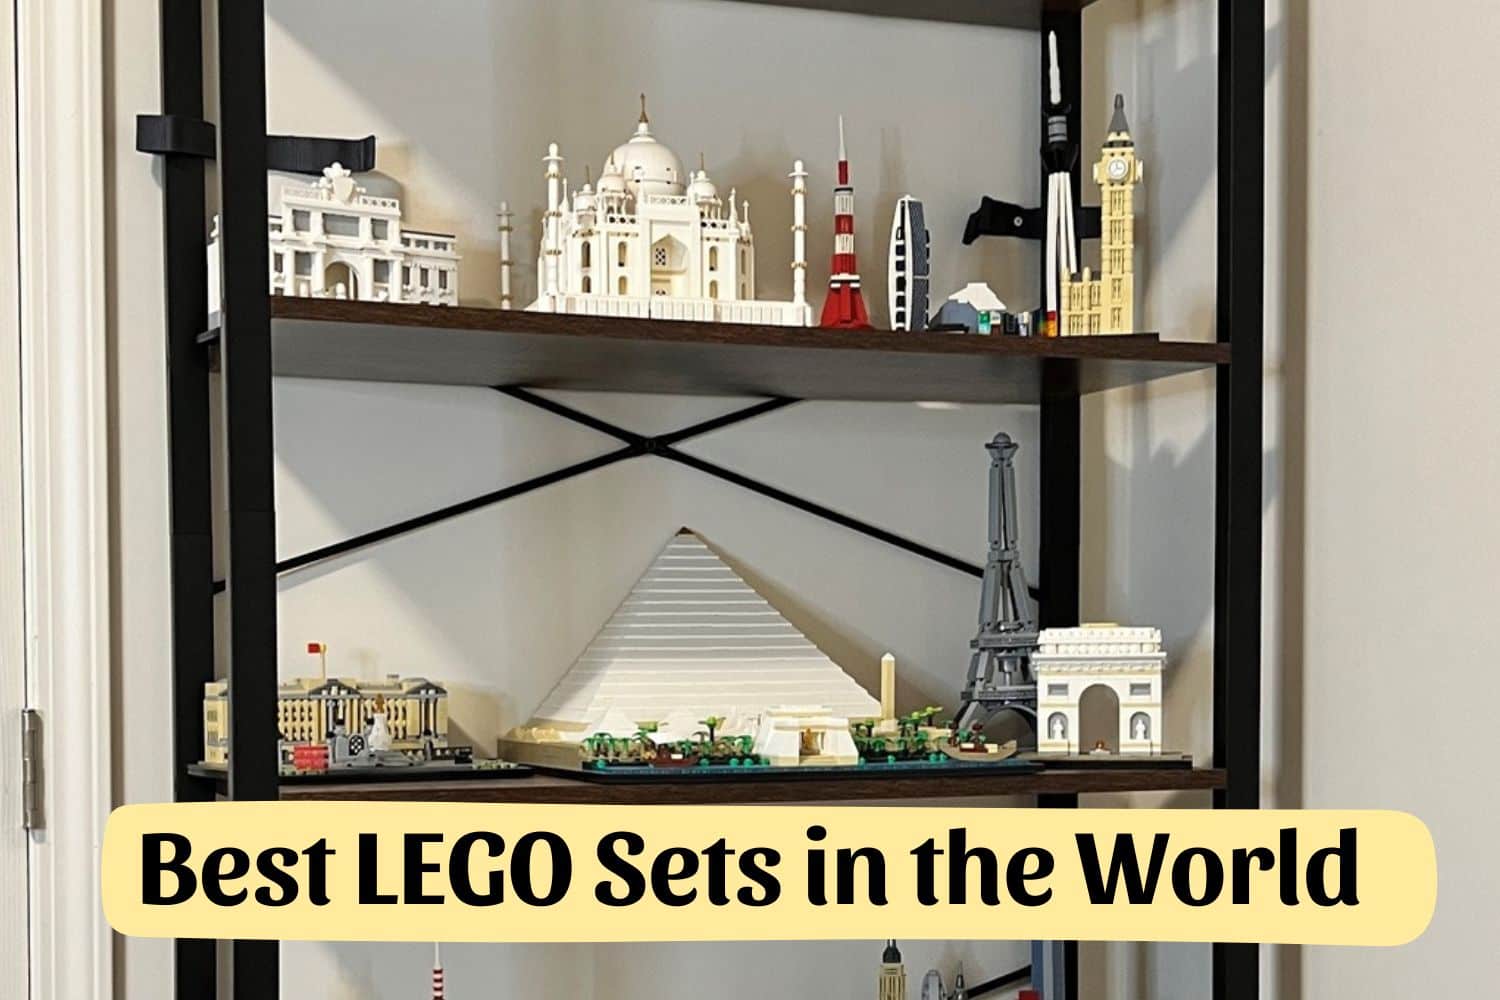 Best LEGO Sets in the World